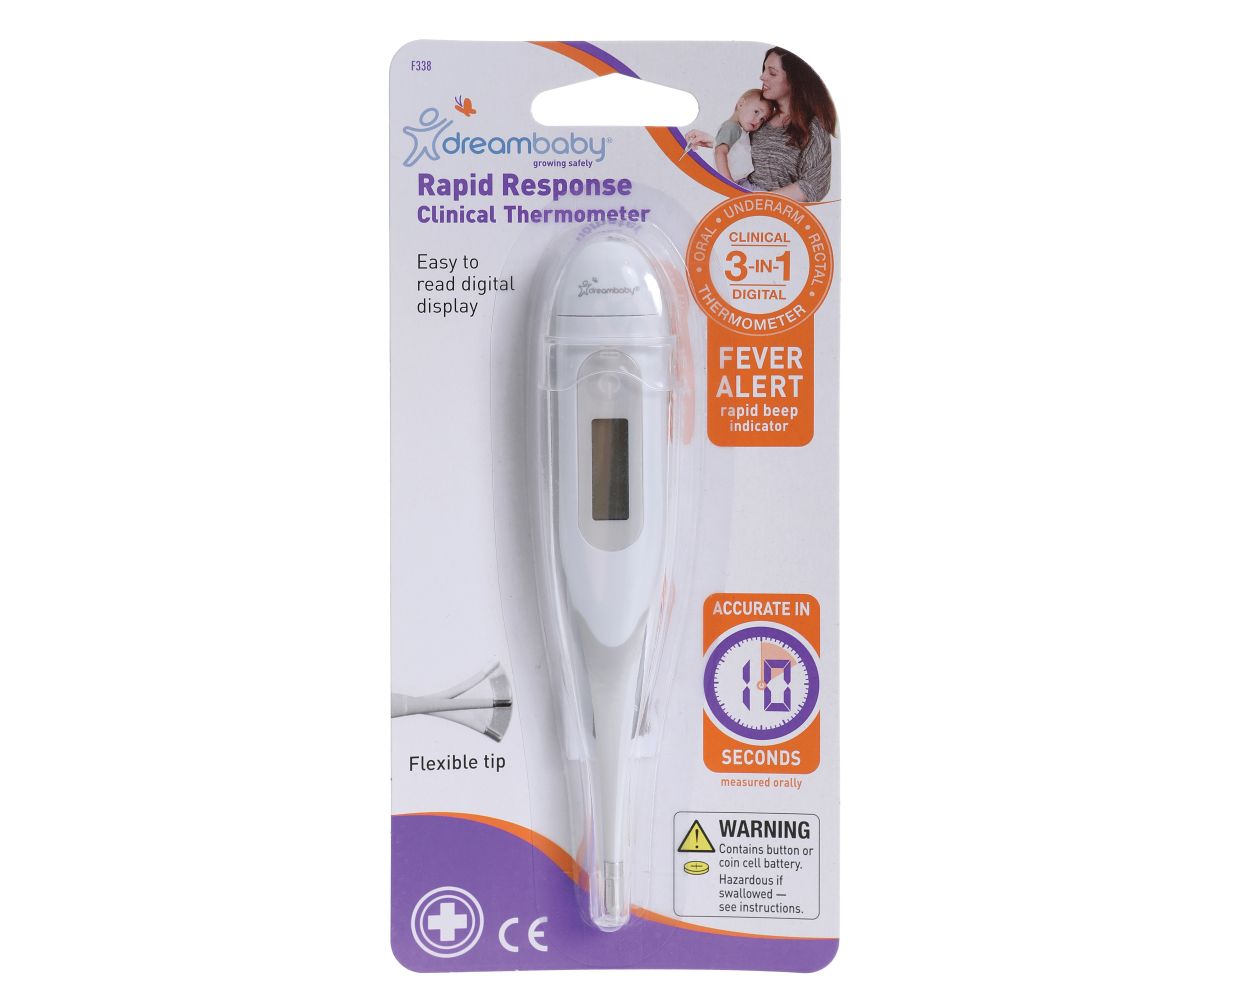 Dreambaby Rapid Response Clinical Digital Thermometer